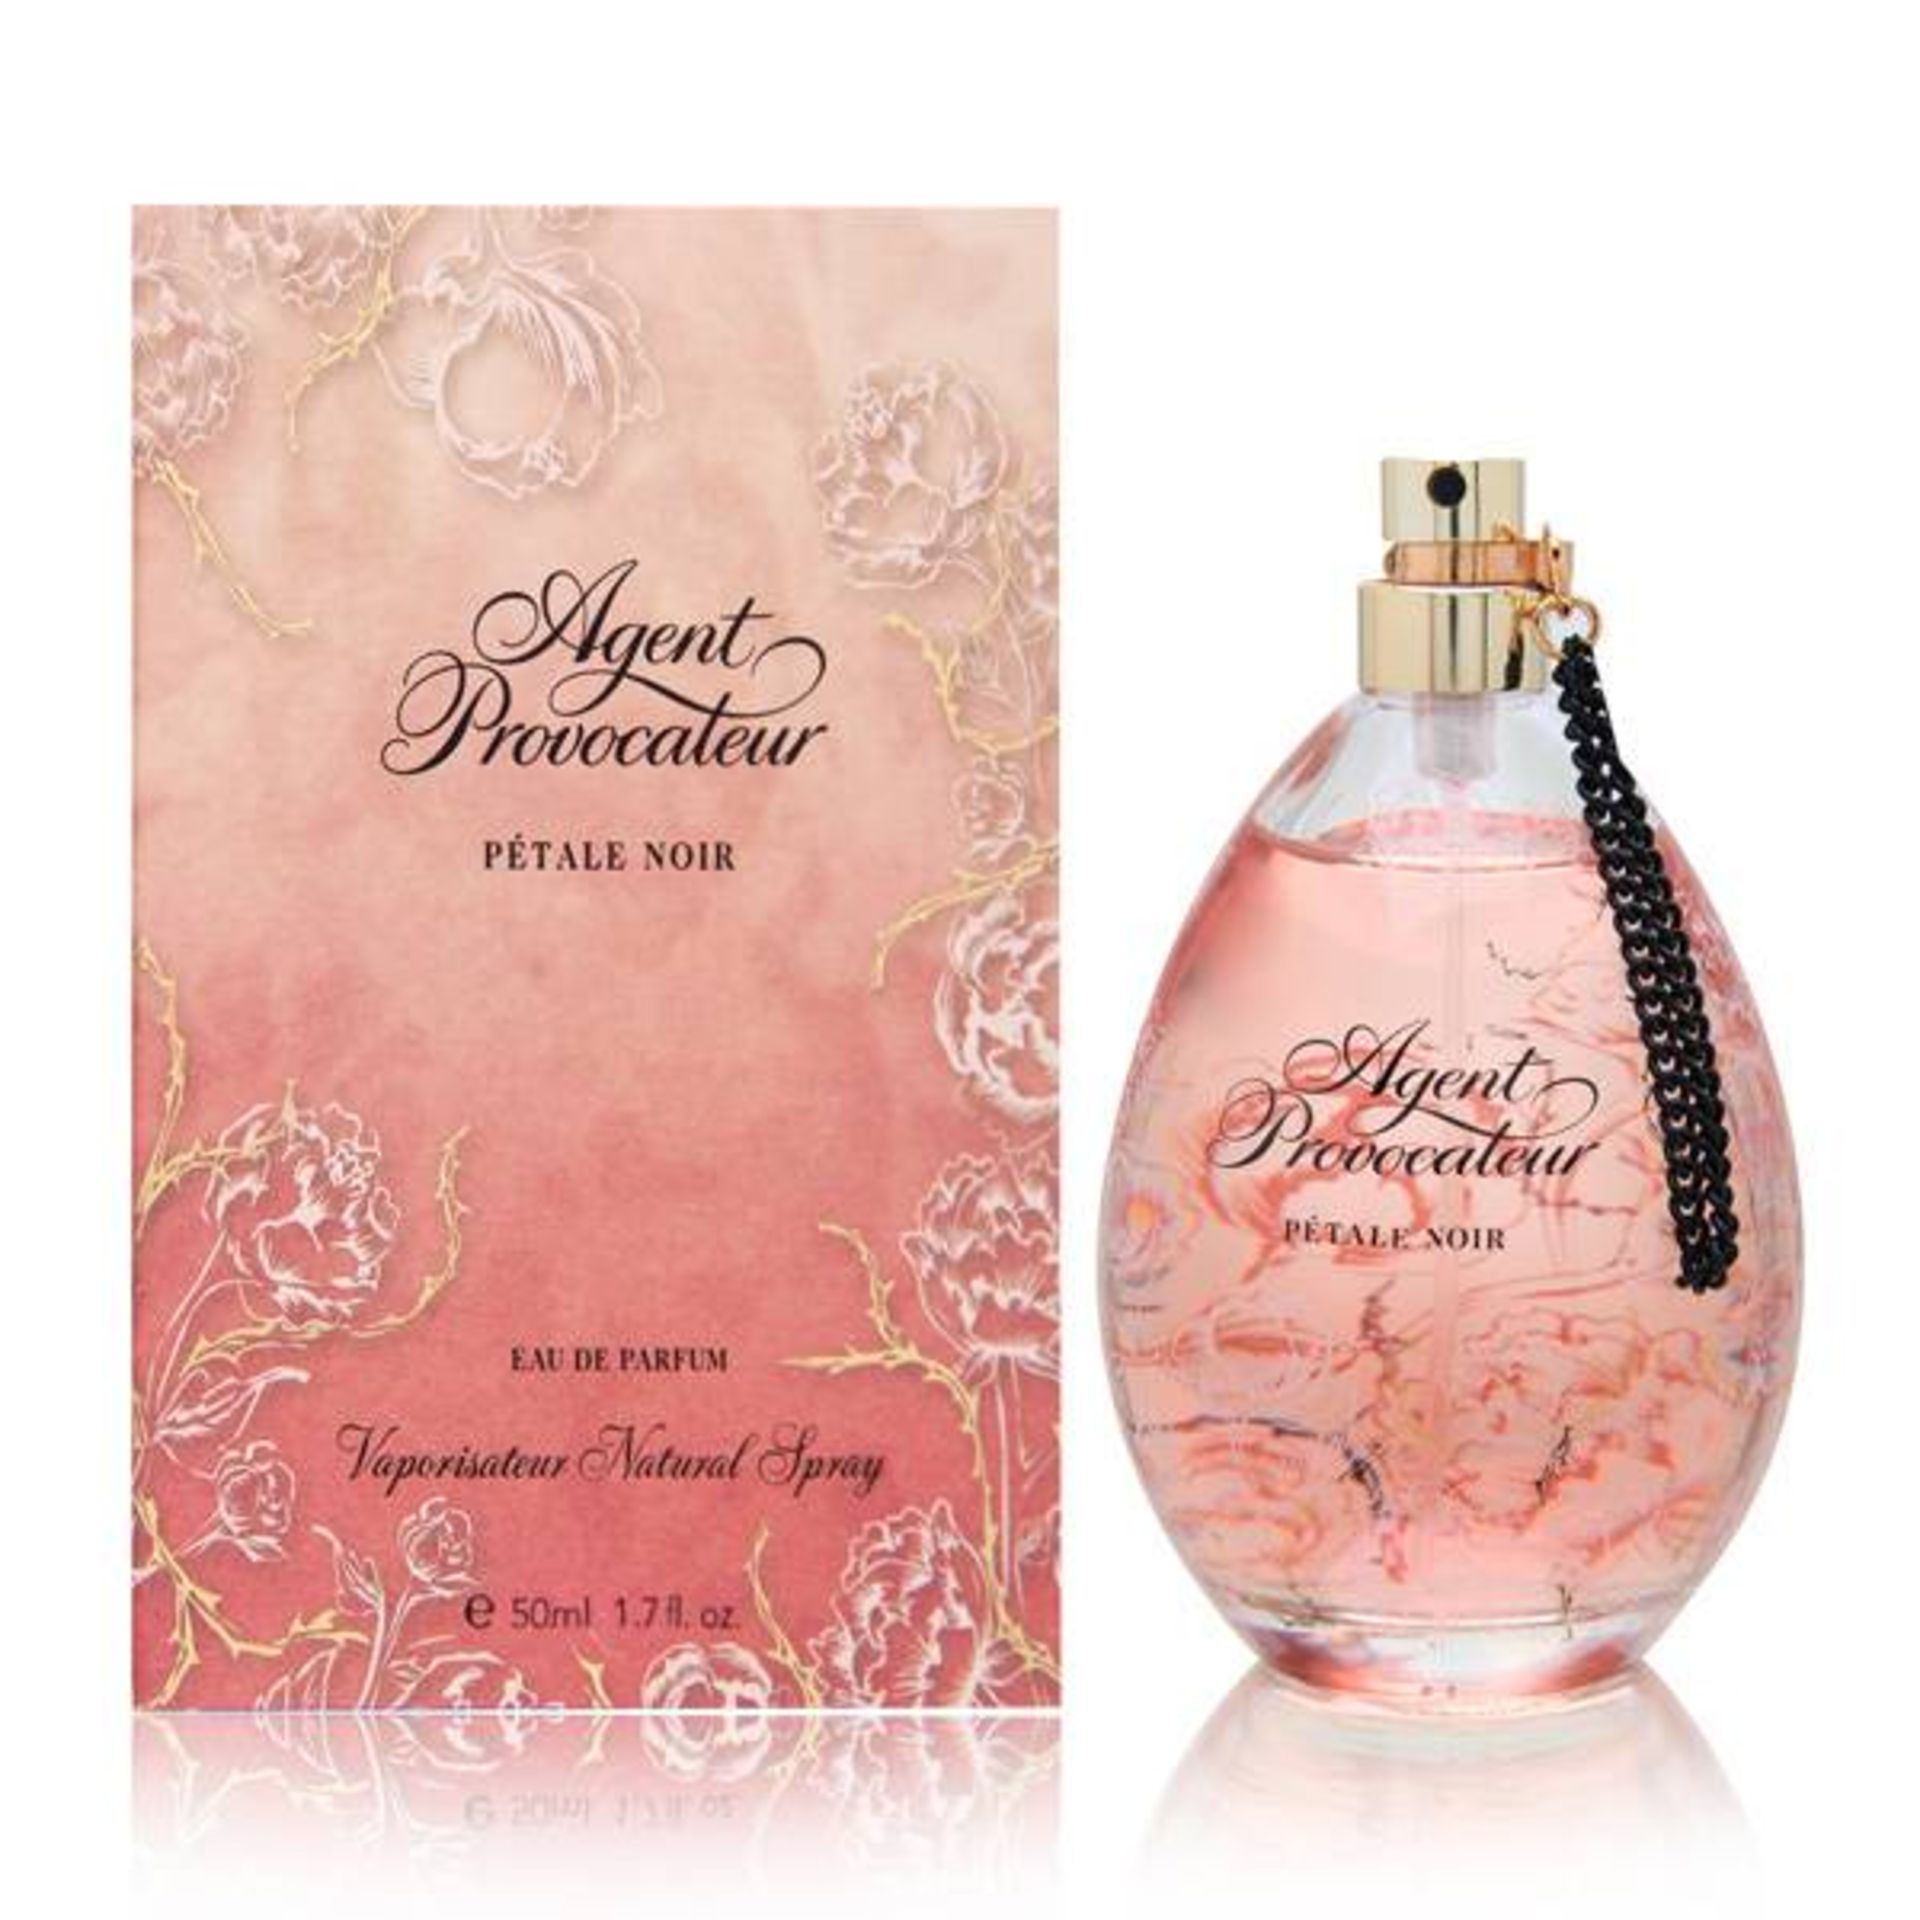 V Brand New Agent Provocateur Petale Noir EDP 50 ml - Tesco Direct £22.07 X 2 YOUR BID PRICE TO BE